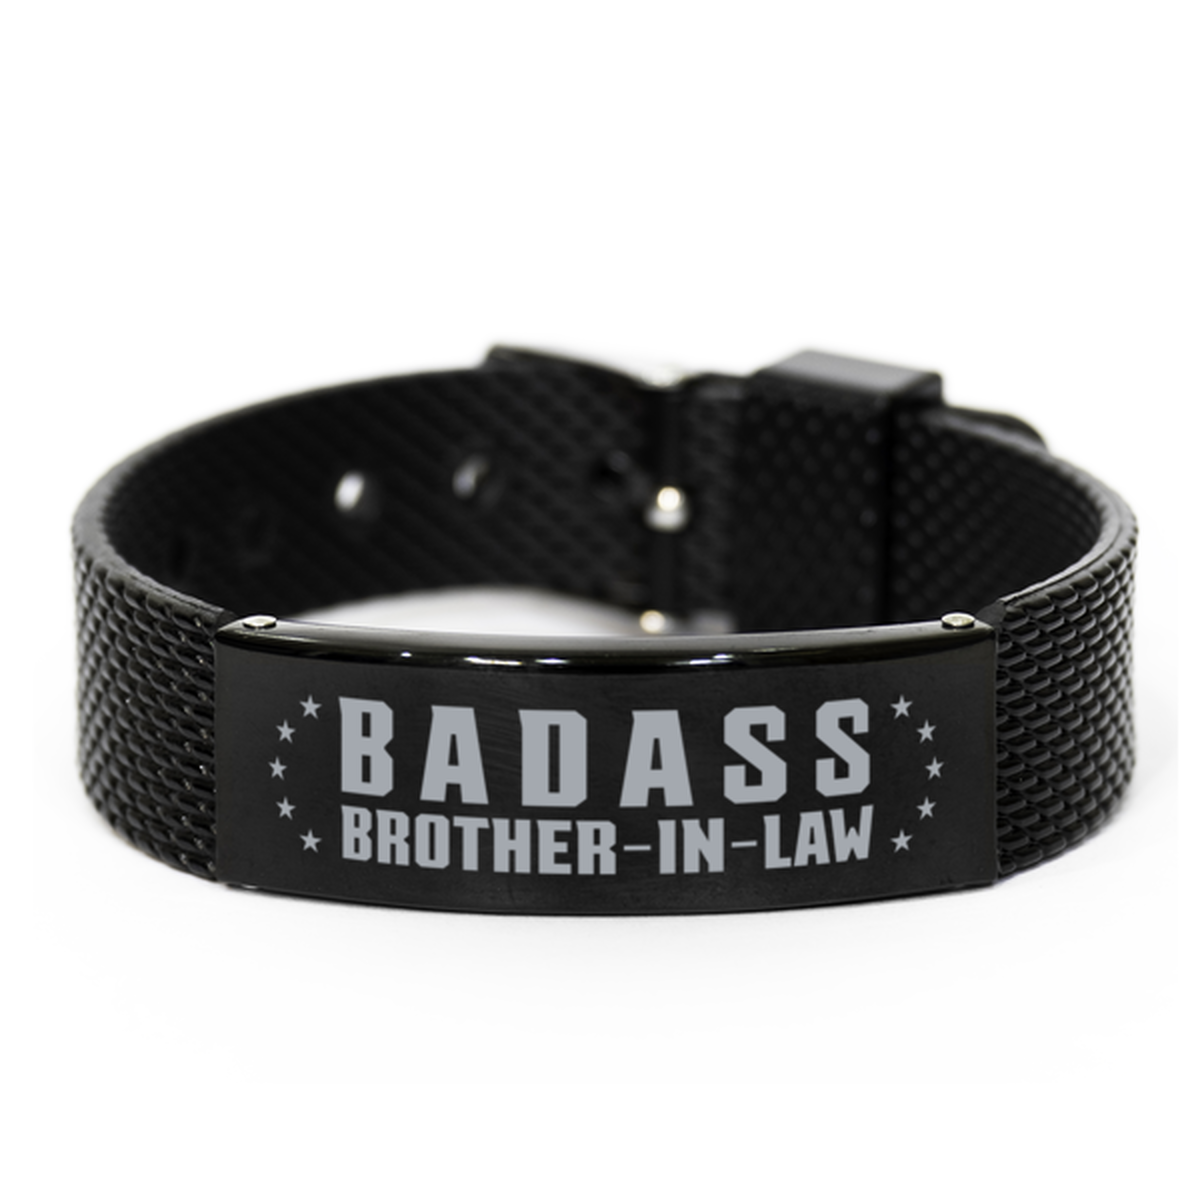 Brother-in-law Black Shark Mesh Bracelet, Badass Brother-in-law, Funny Family Gifts For Brother-in-law From Brother Sister